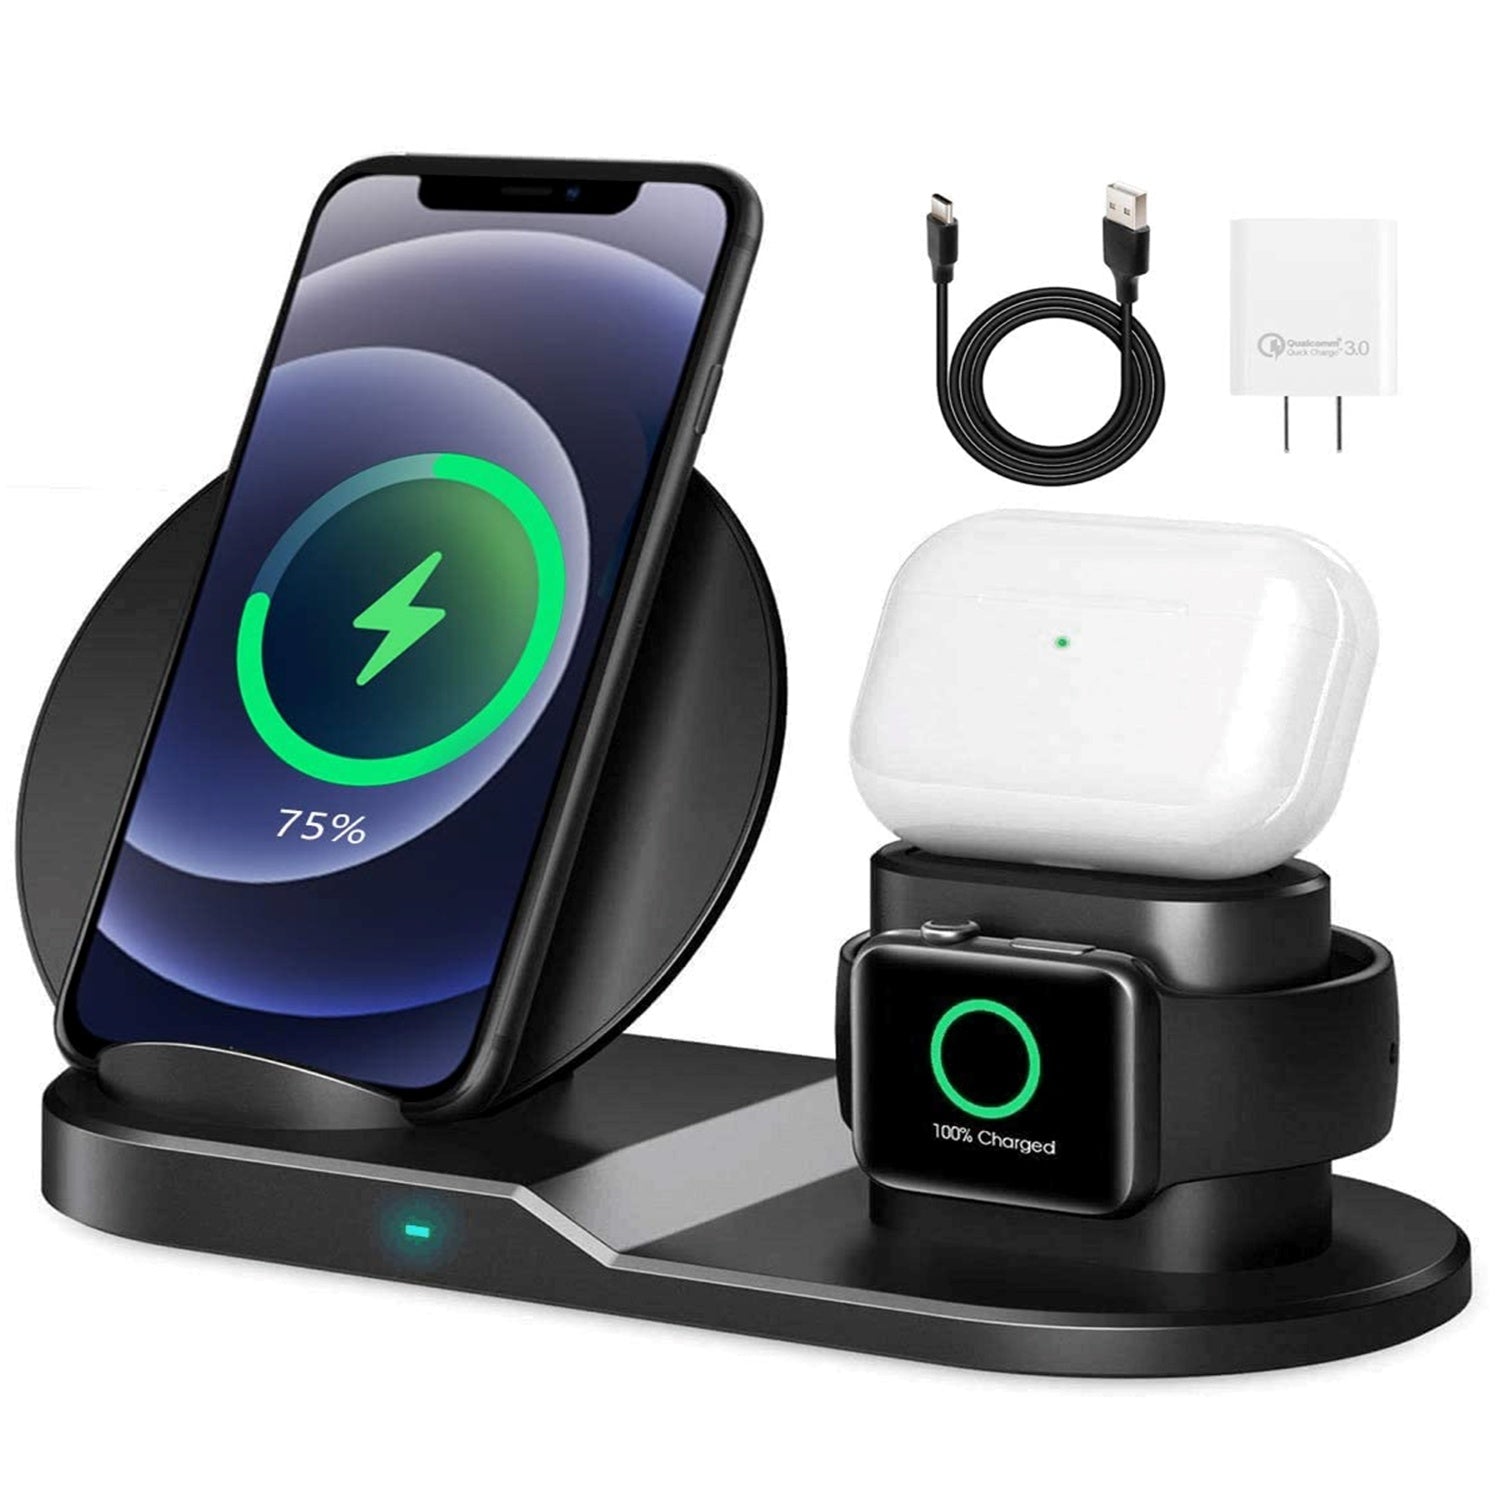 5 Core Wireless Charger, 3 in 1 Qi Wireless Charging Station 10W / 15W, Fast Wireless Charging Pad, Travel Charger for Multiple Devices for Qi Phones, Android, Galaxy S- Series, Watch, Earbuds - WCR 3